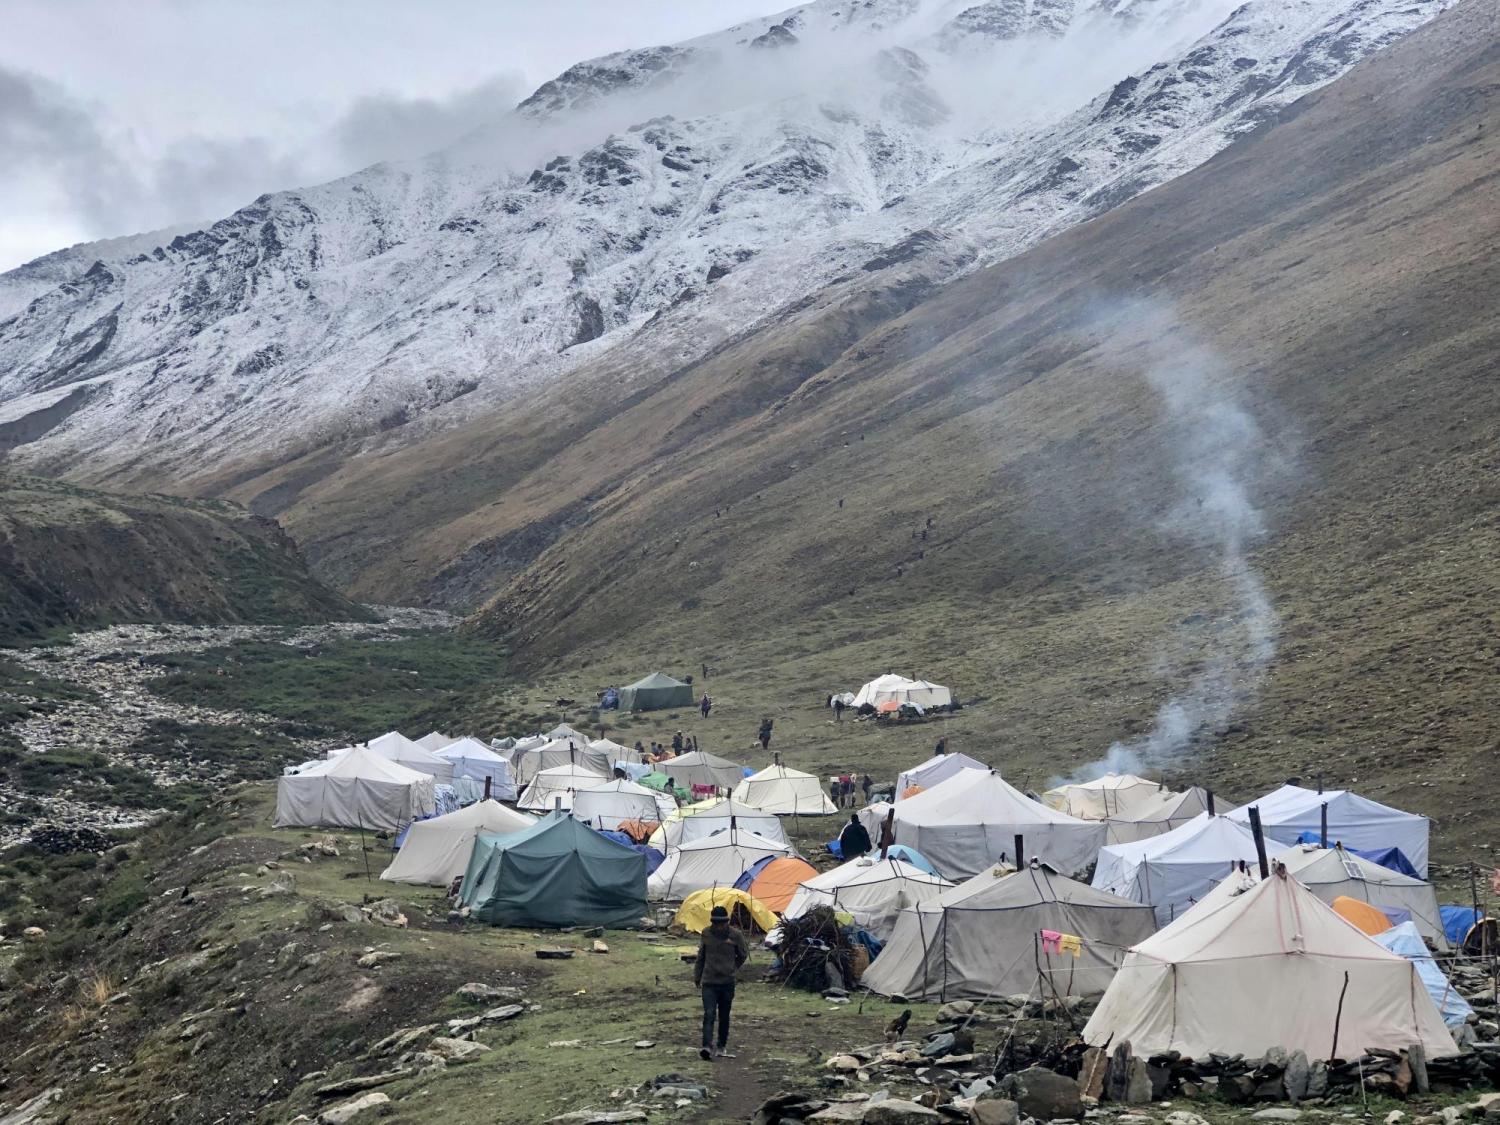 Tents in mountains